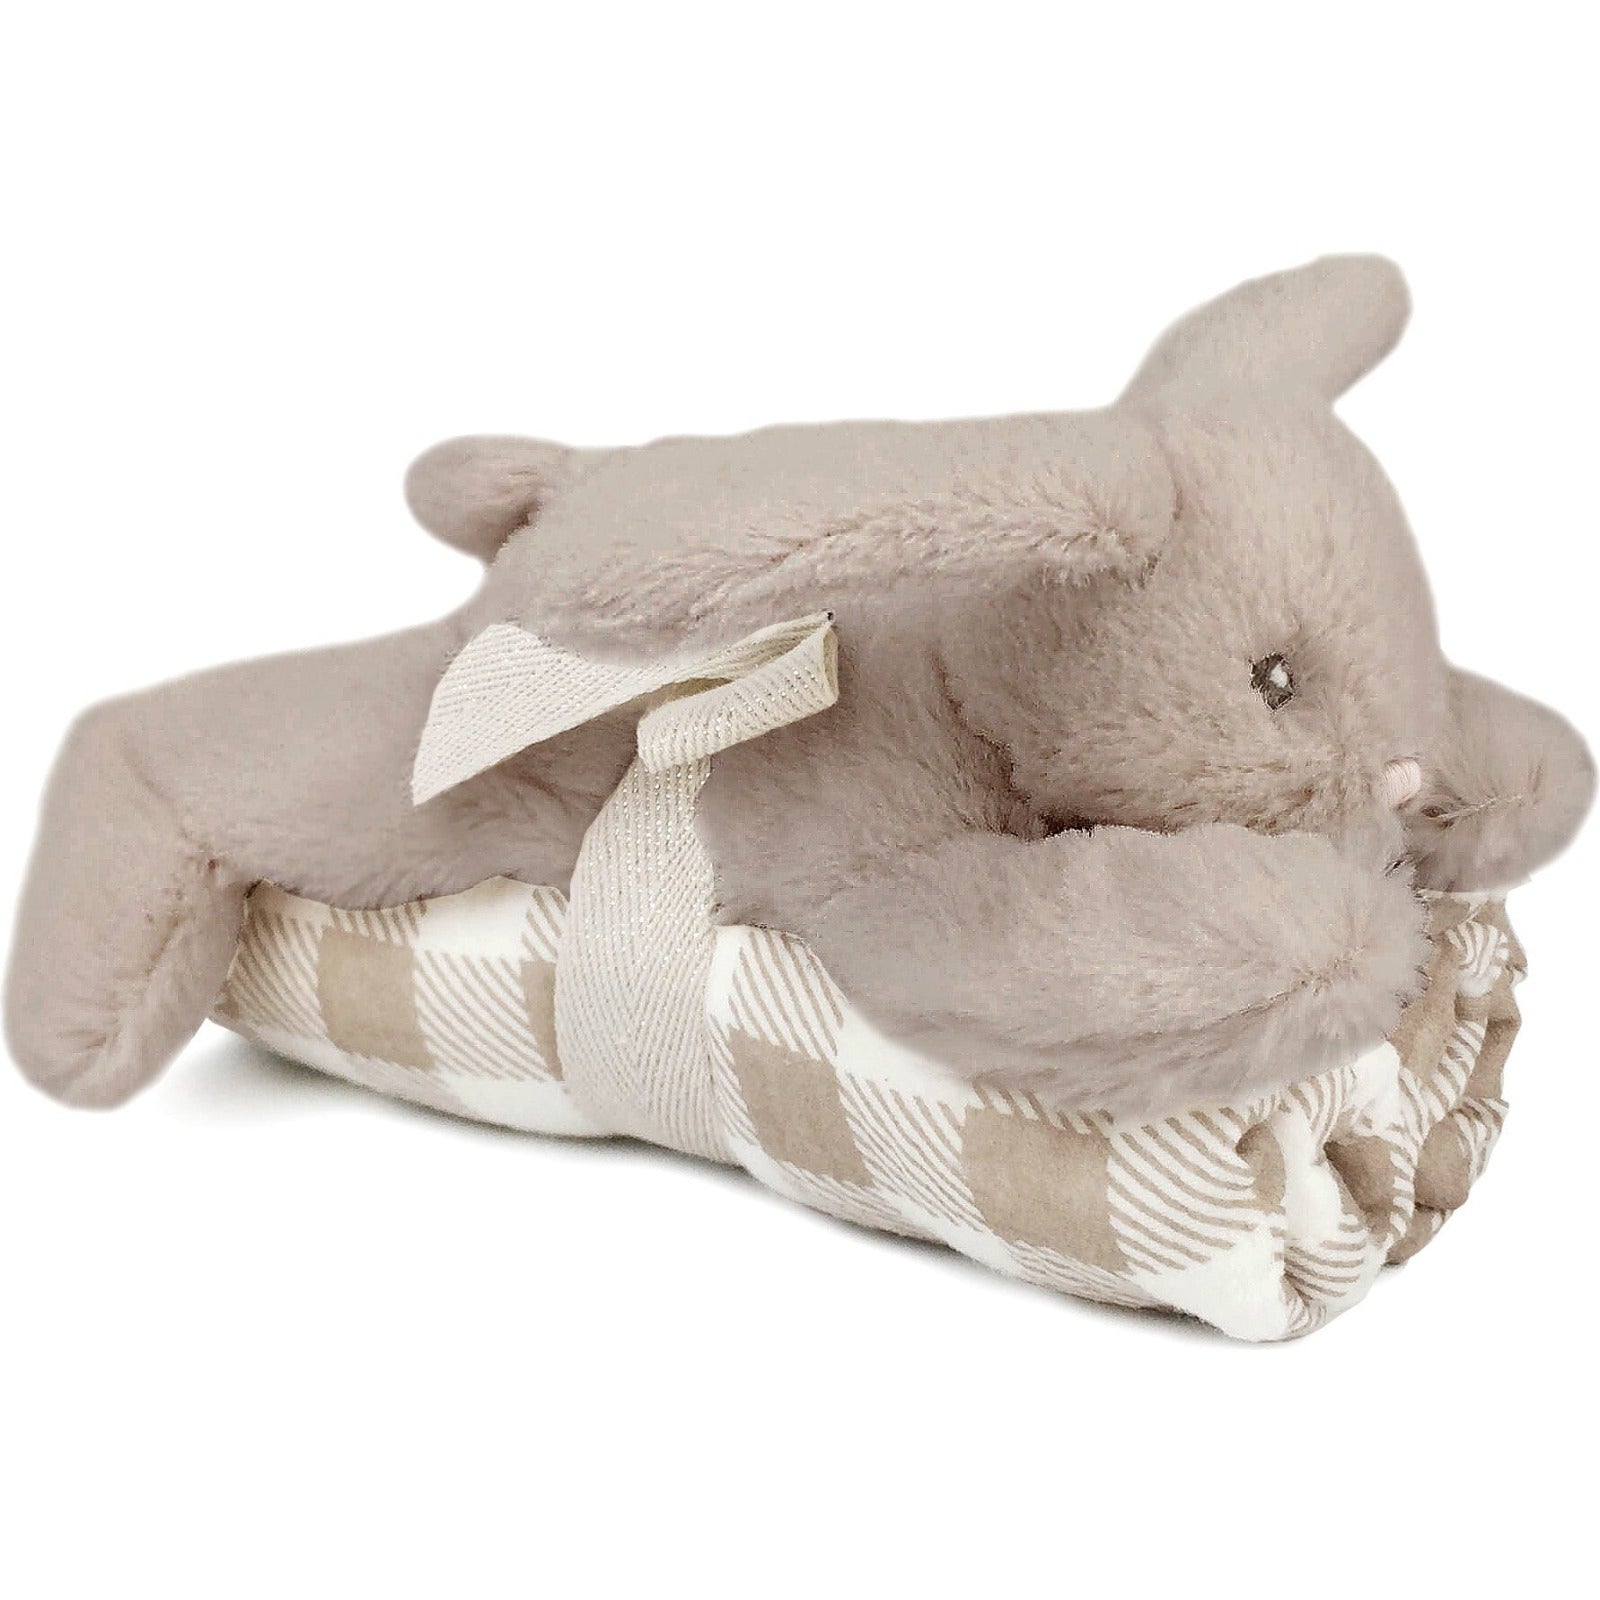 Blankie Bunny Gift Set | Mon Ami | Rochester NY Gift Shop – STACY K FLORAL